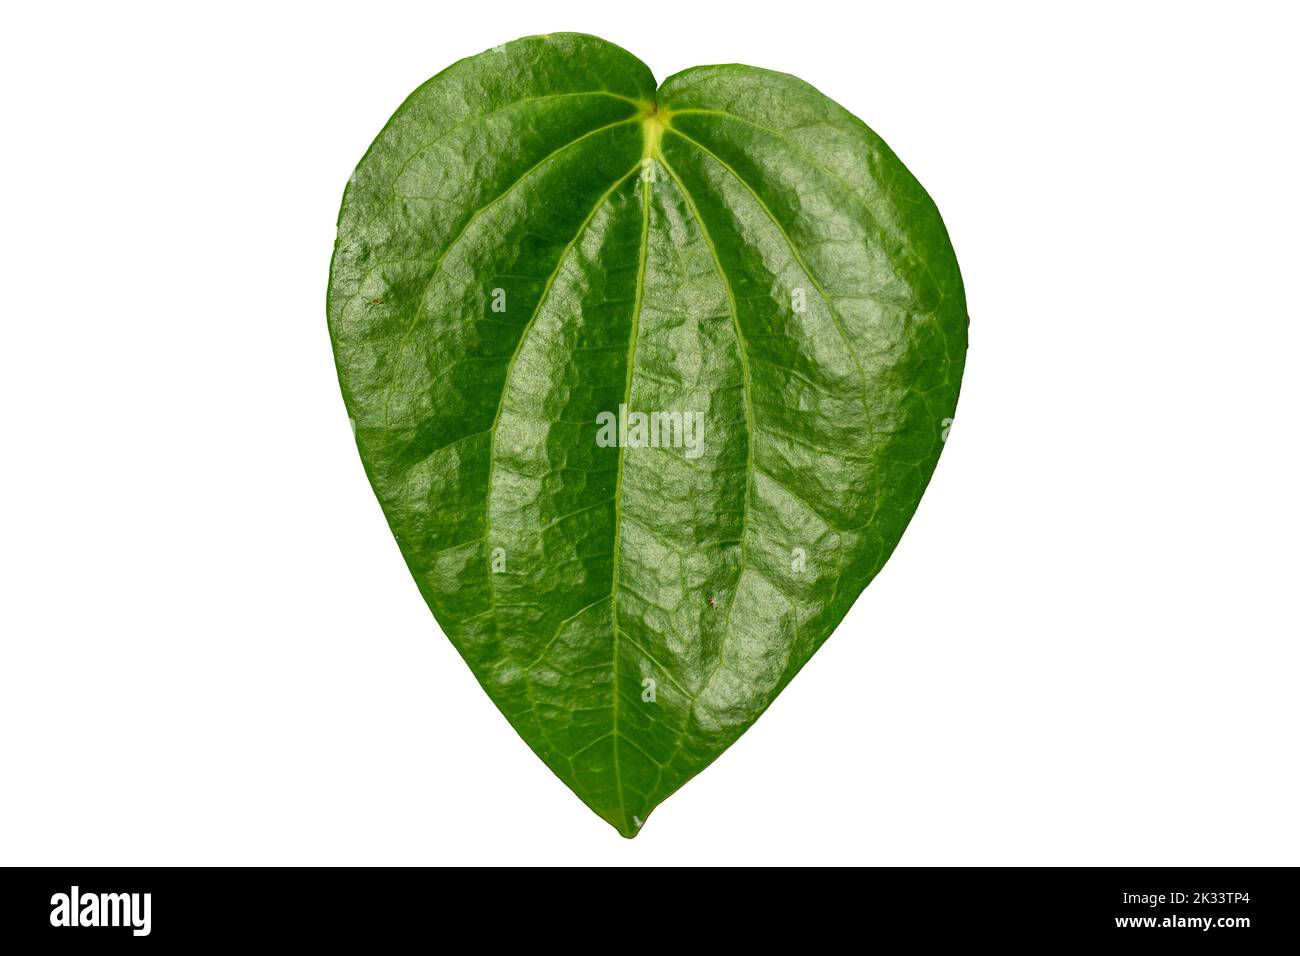 Close up of a green heart-shaped Betel leaf with a detailed leaf frame, isolated on a white background Stock Photo